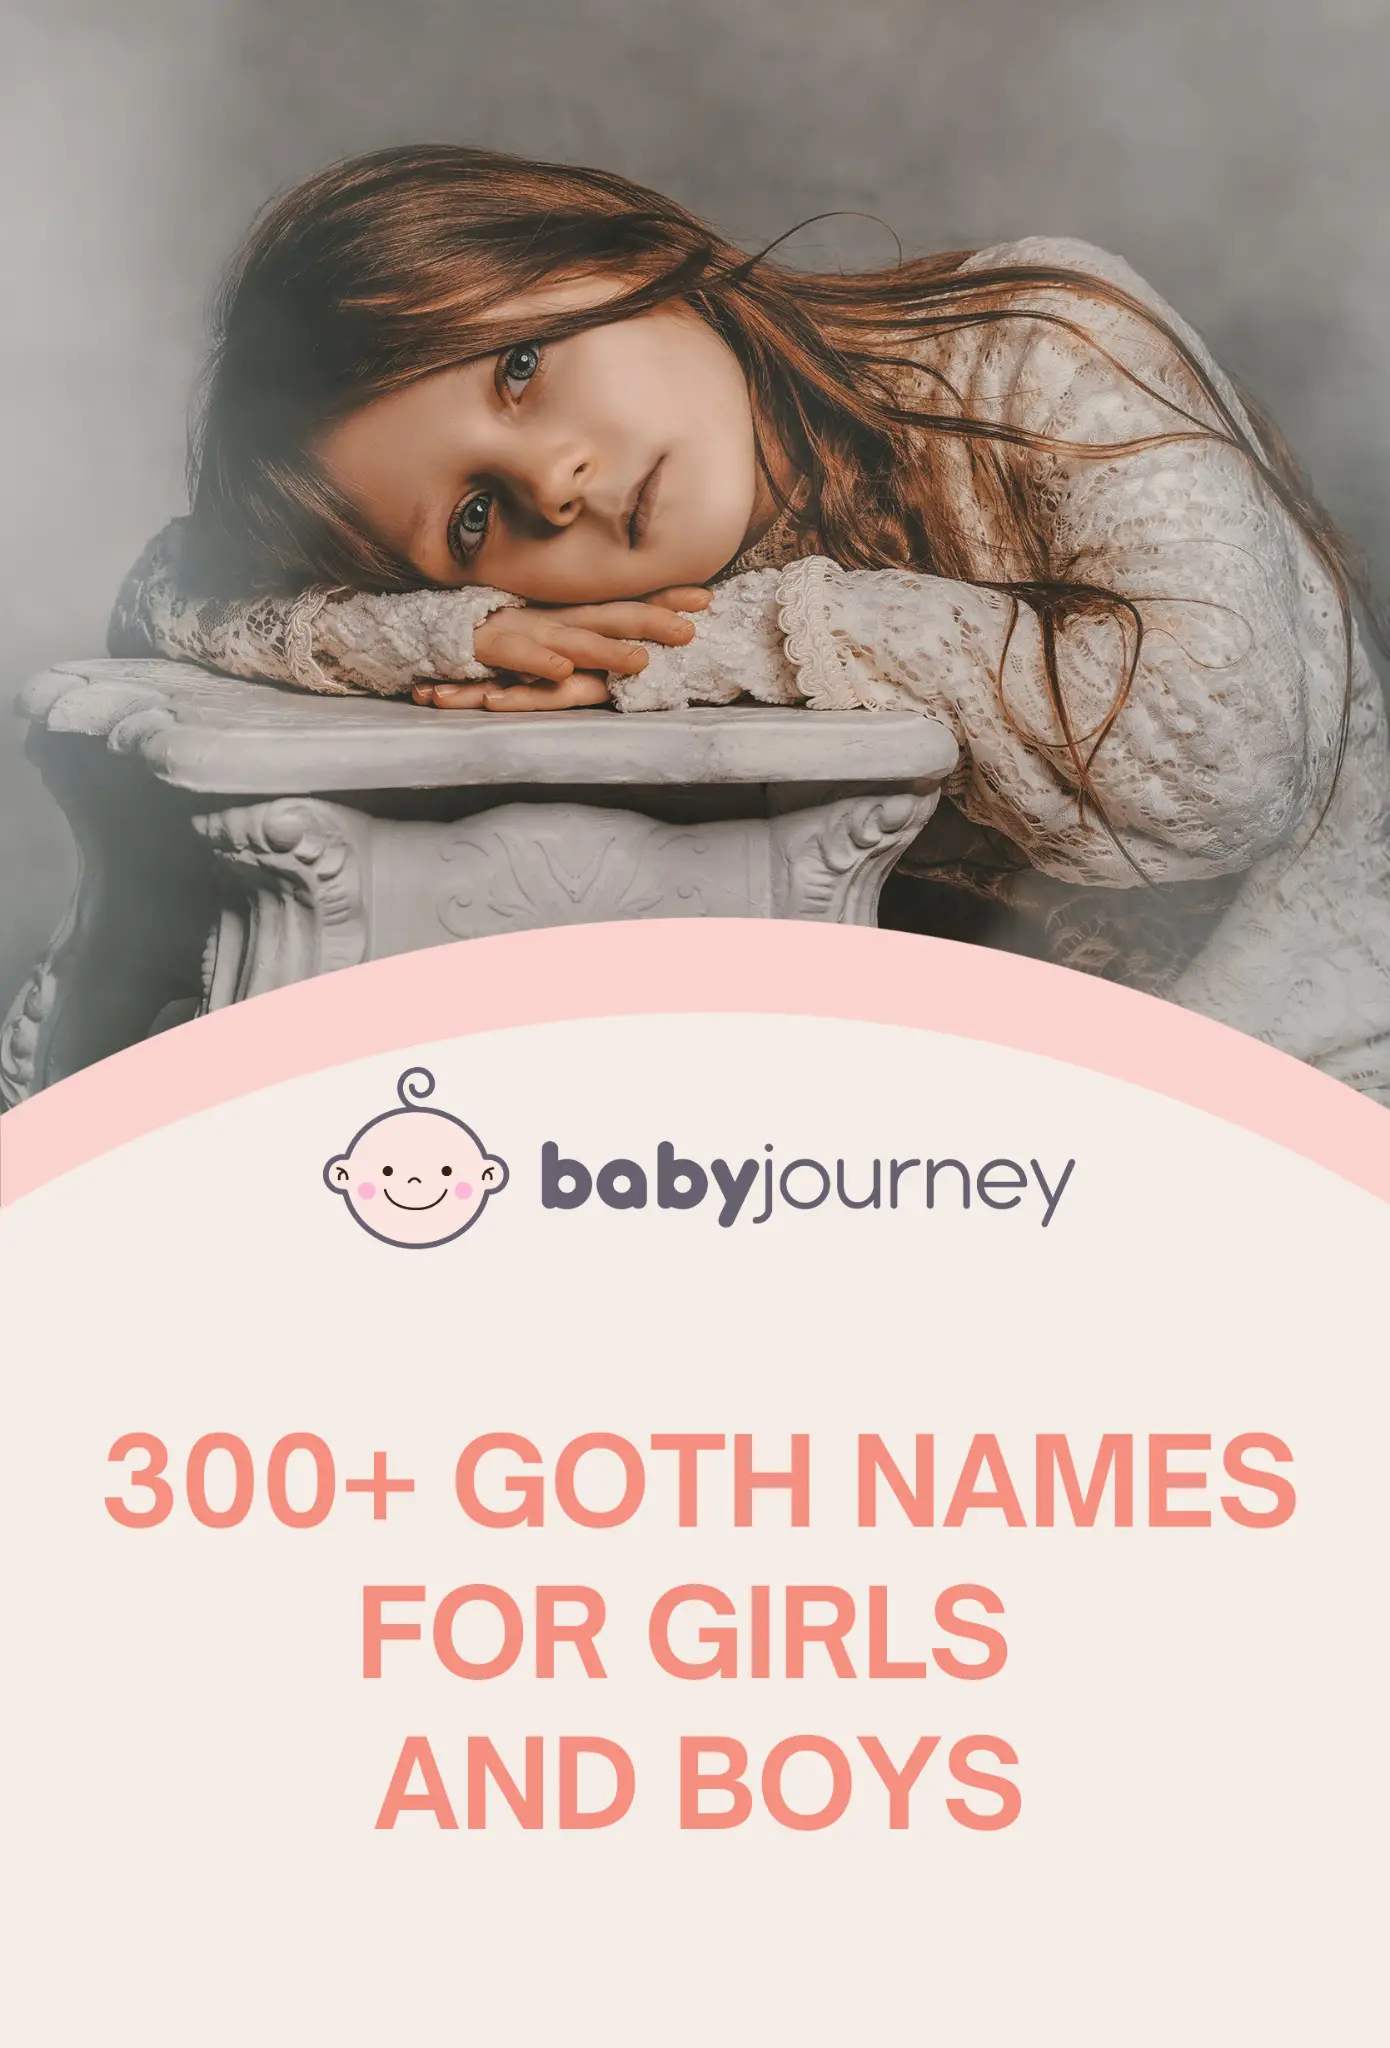 300+ Goth Names for Girls and Boys - Baby Journey